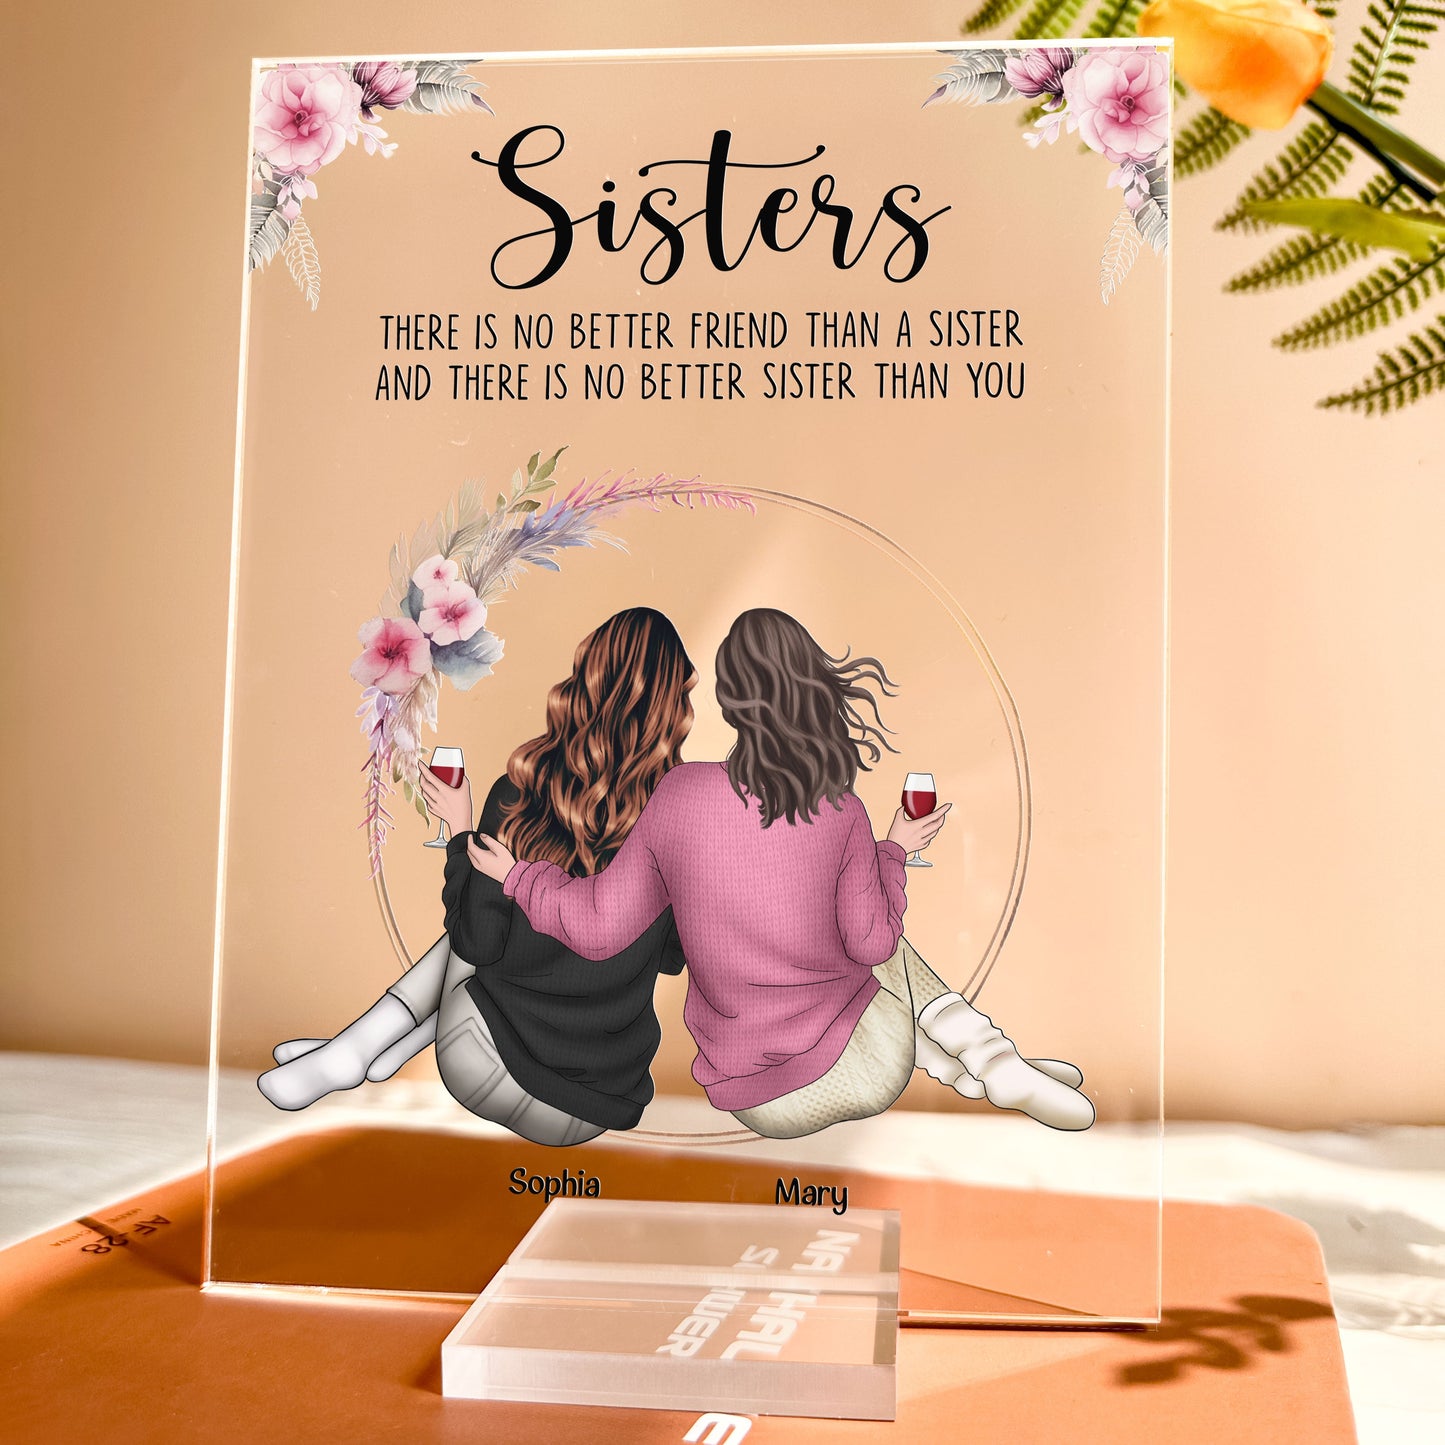 There Is No Better Sister Than You - Personalized Acrylic Plaque